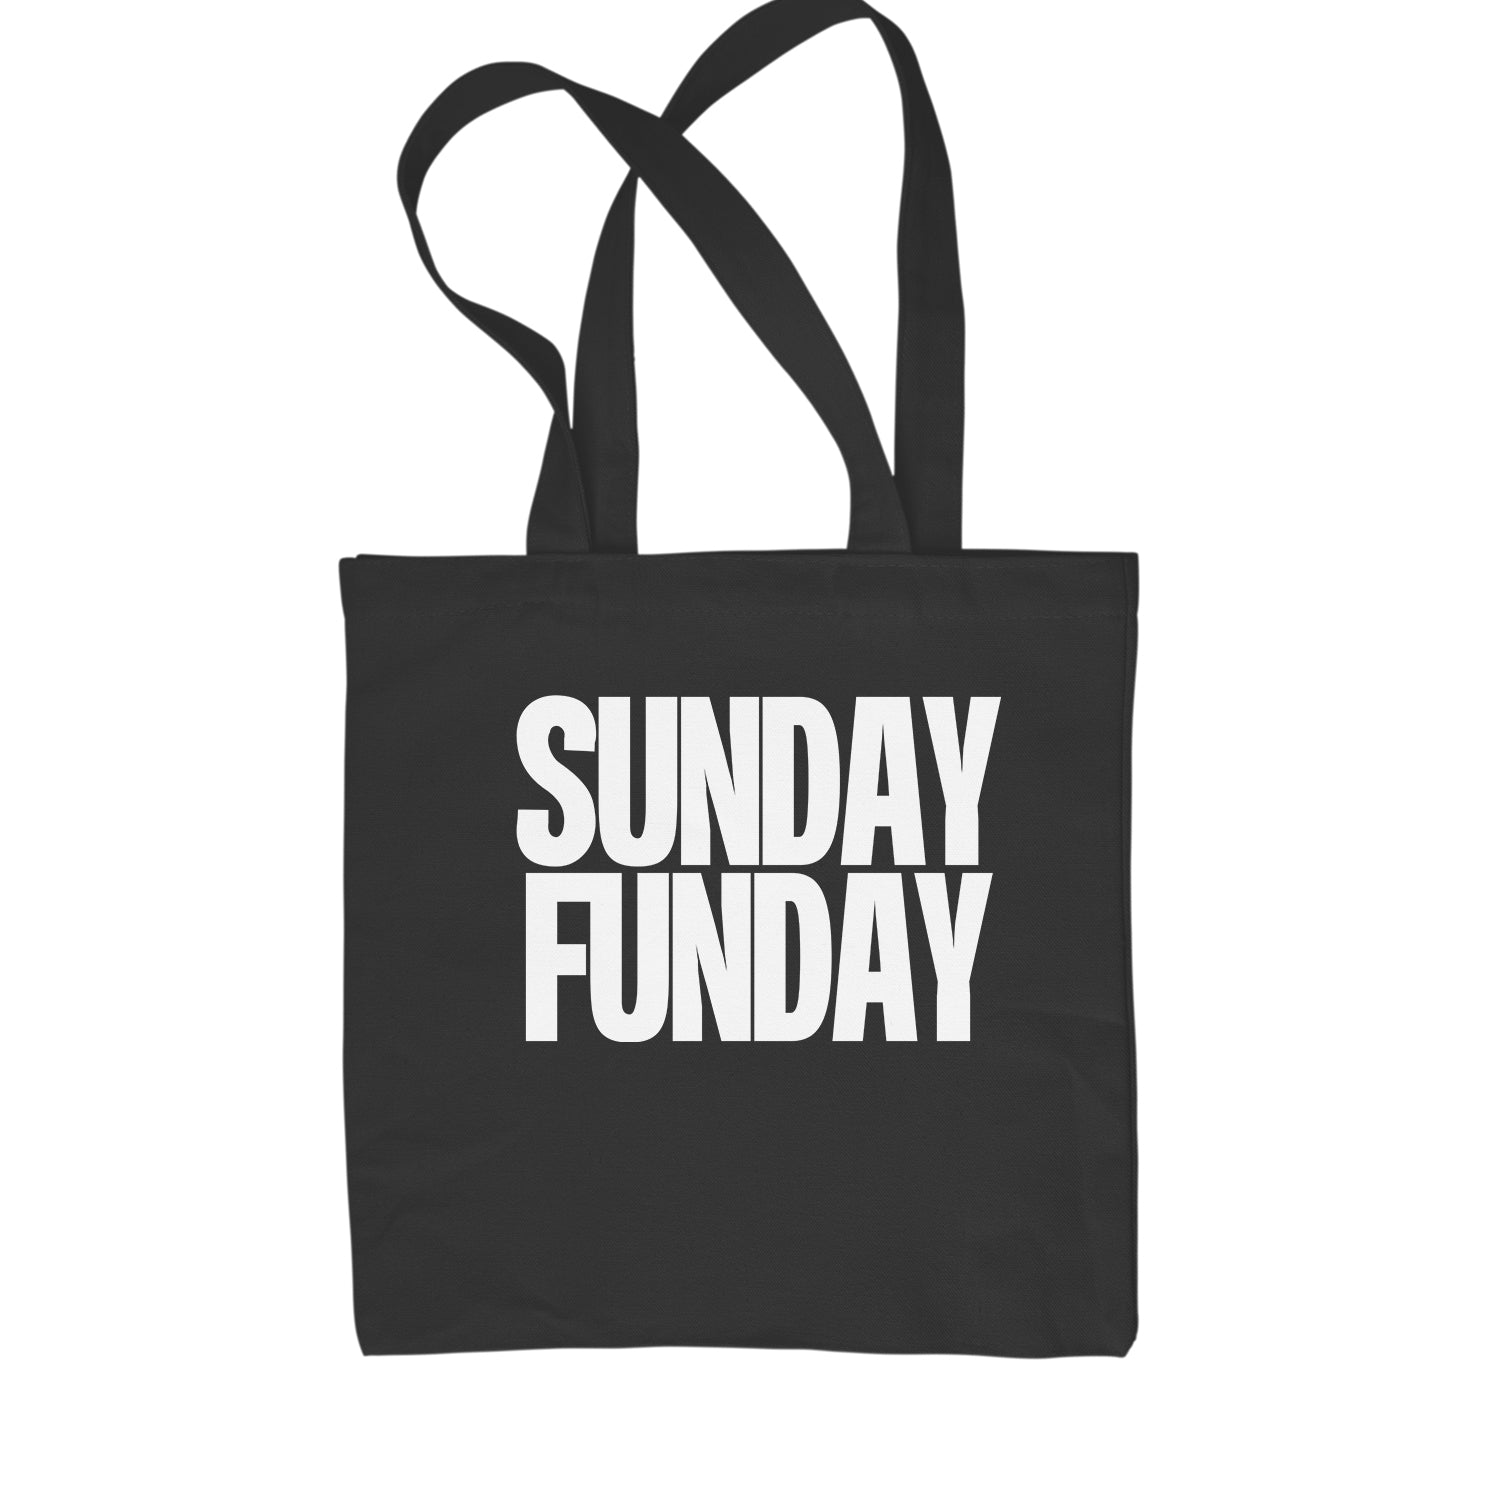 Sunday Funday Shopping Tote Bag day, drinking, fun, funday, partying, sun, Sunday by Expression Tees